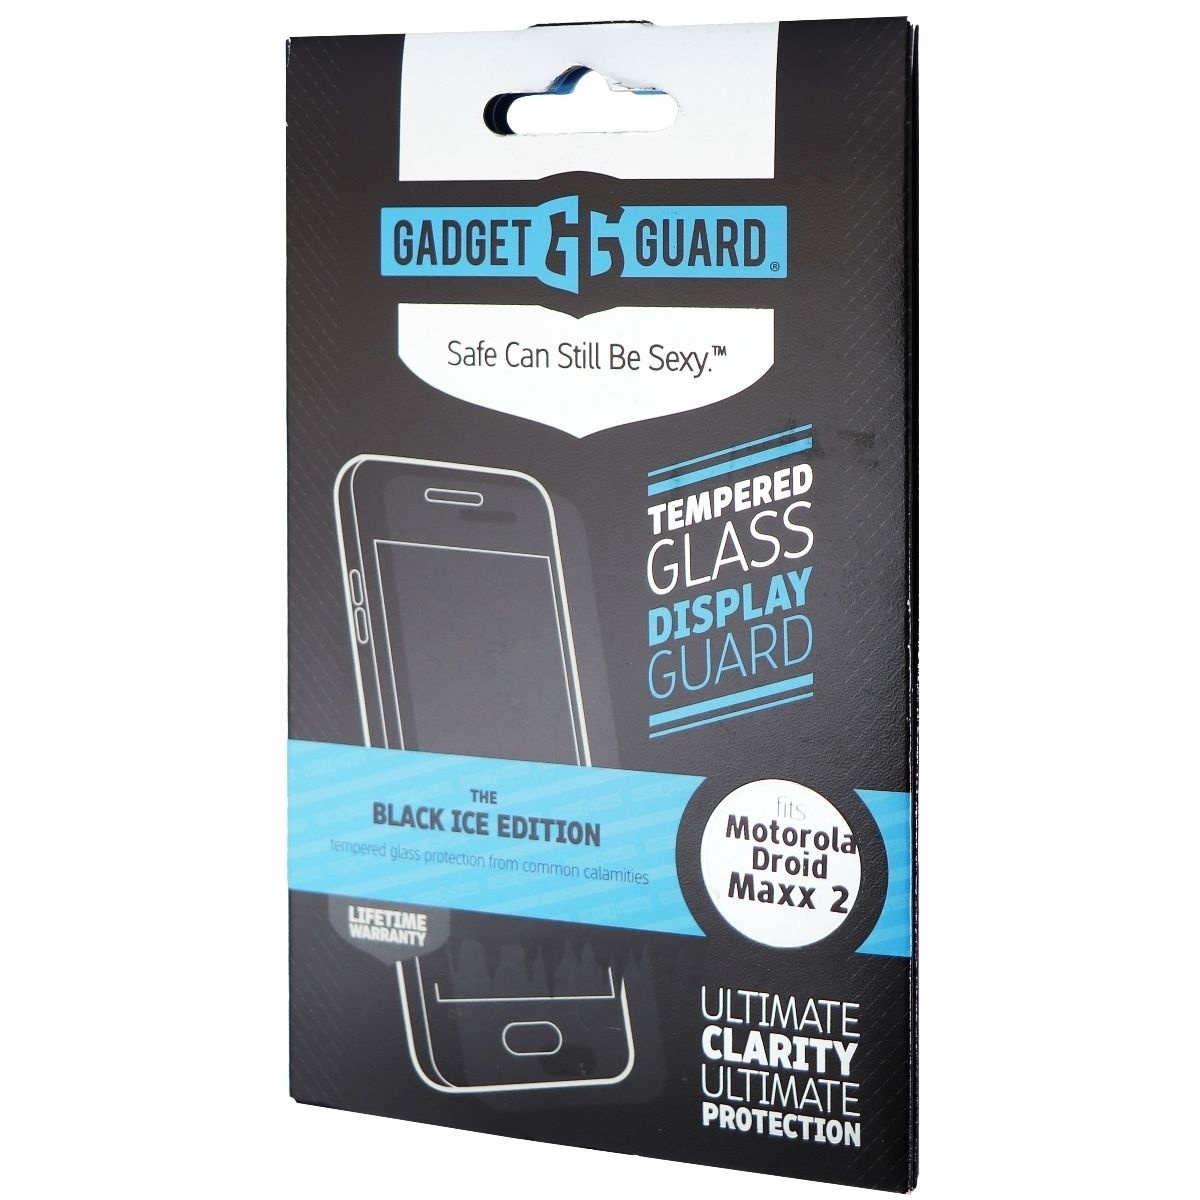 Gadget Guard Black Ice Tempered Glass For Motorola Droid Maxx 2 - Clear